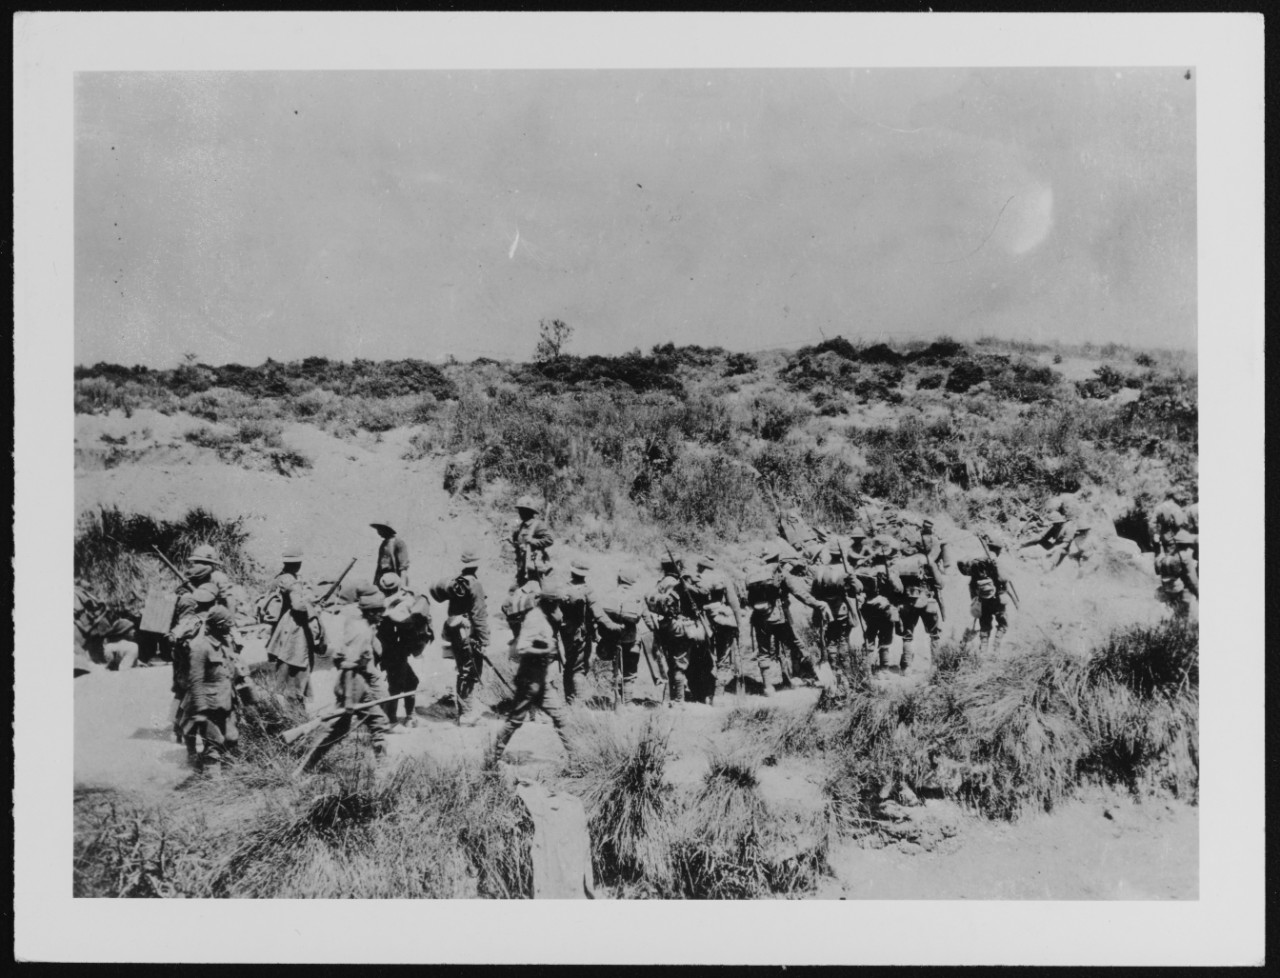 Gallipoli Campaign, British troops en route to front line